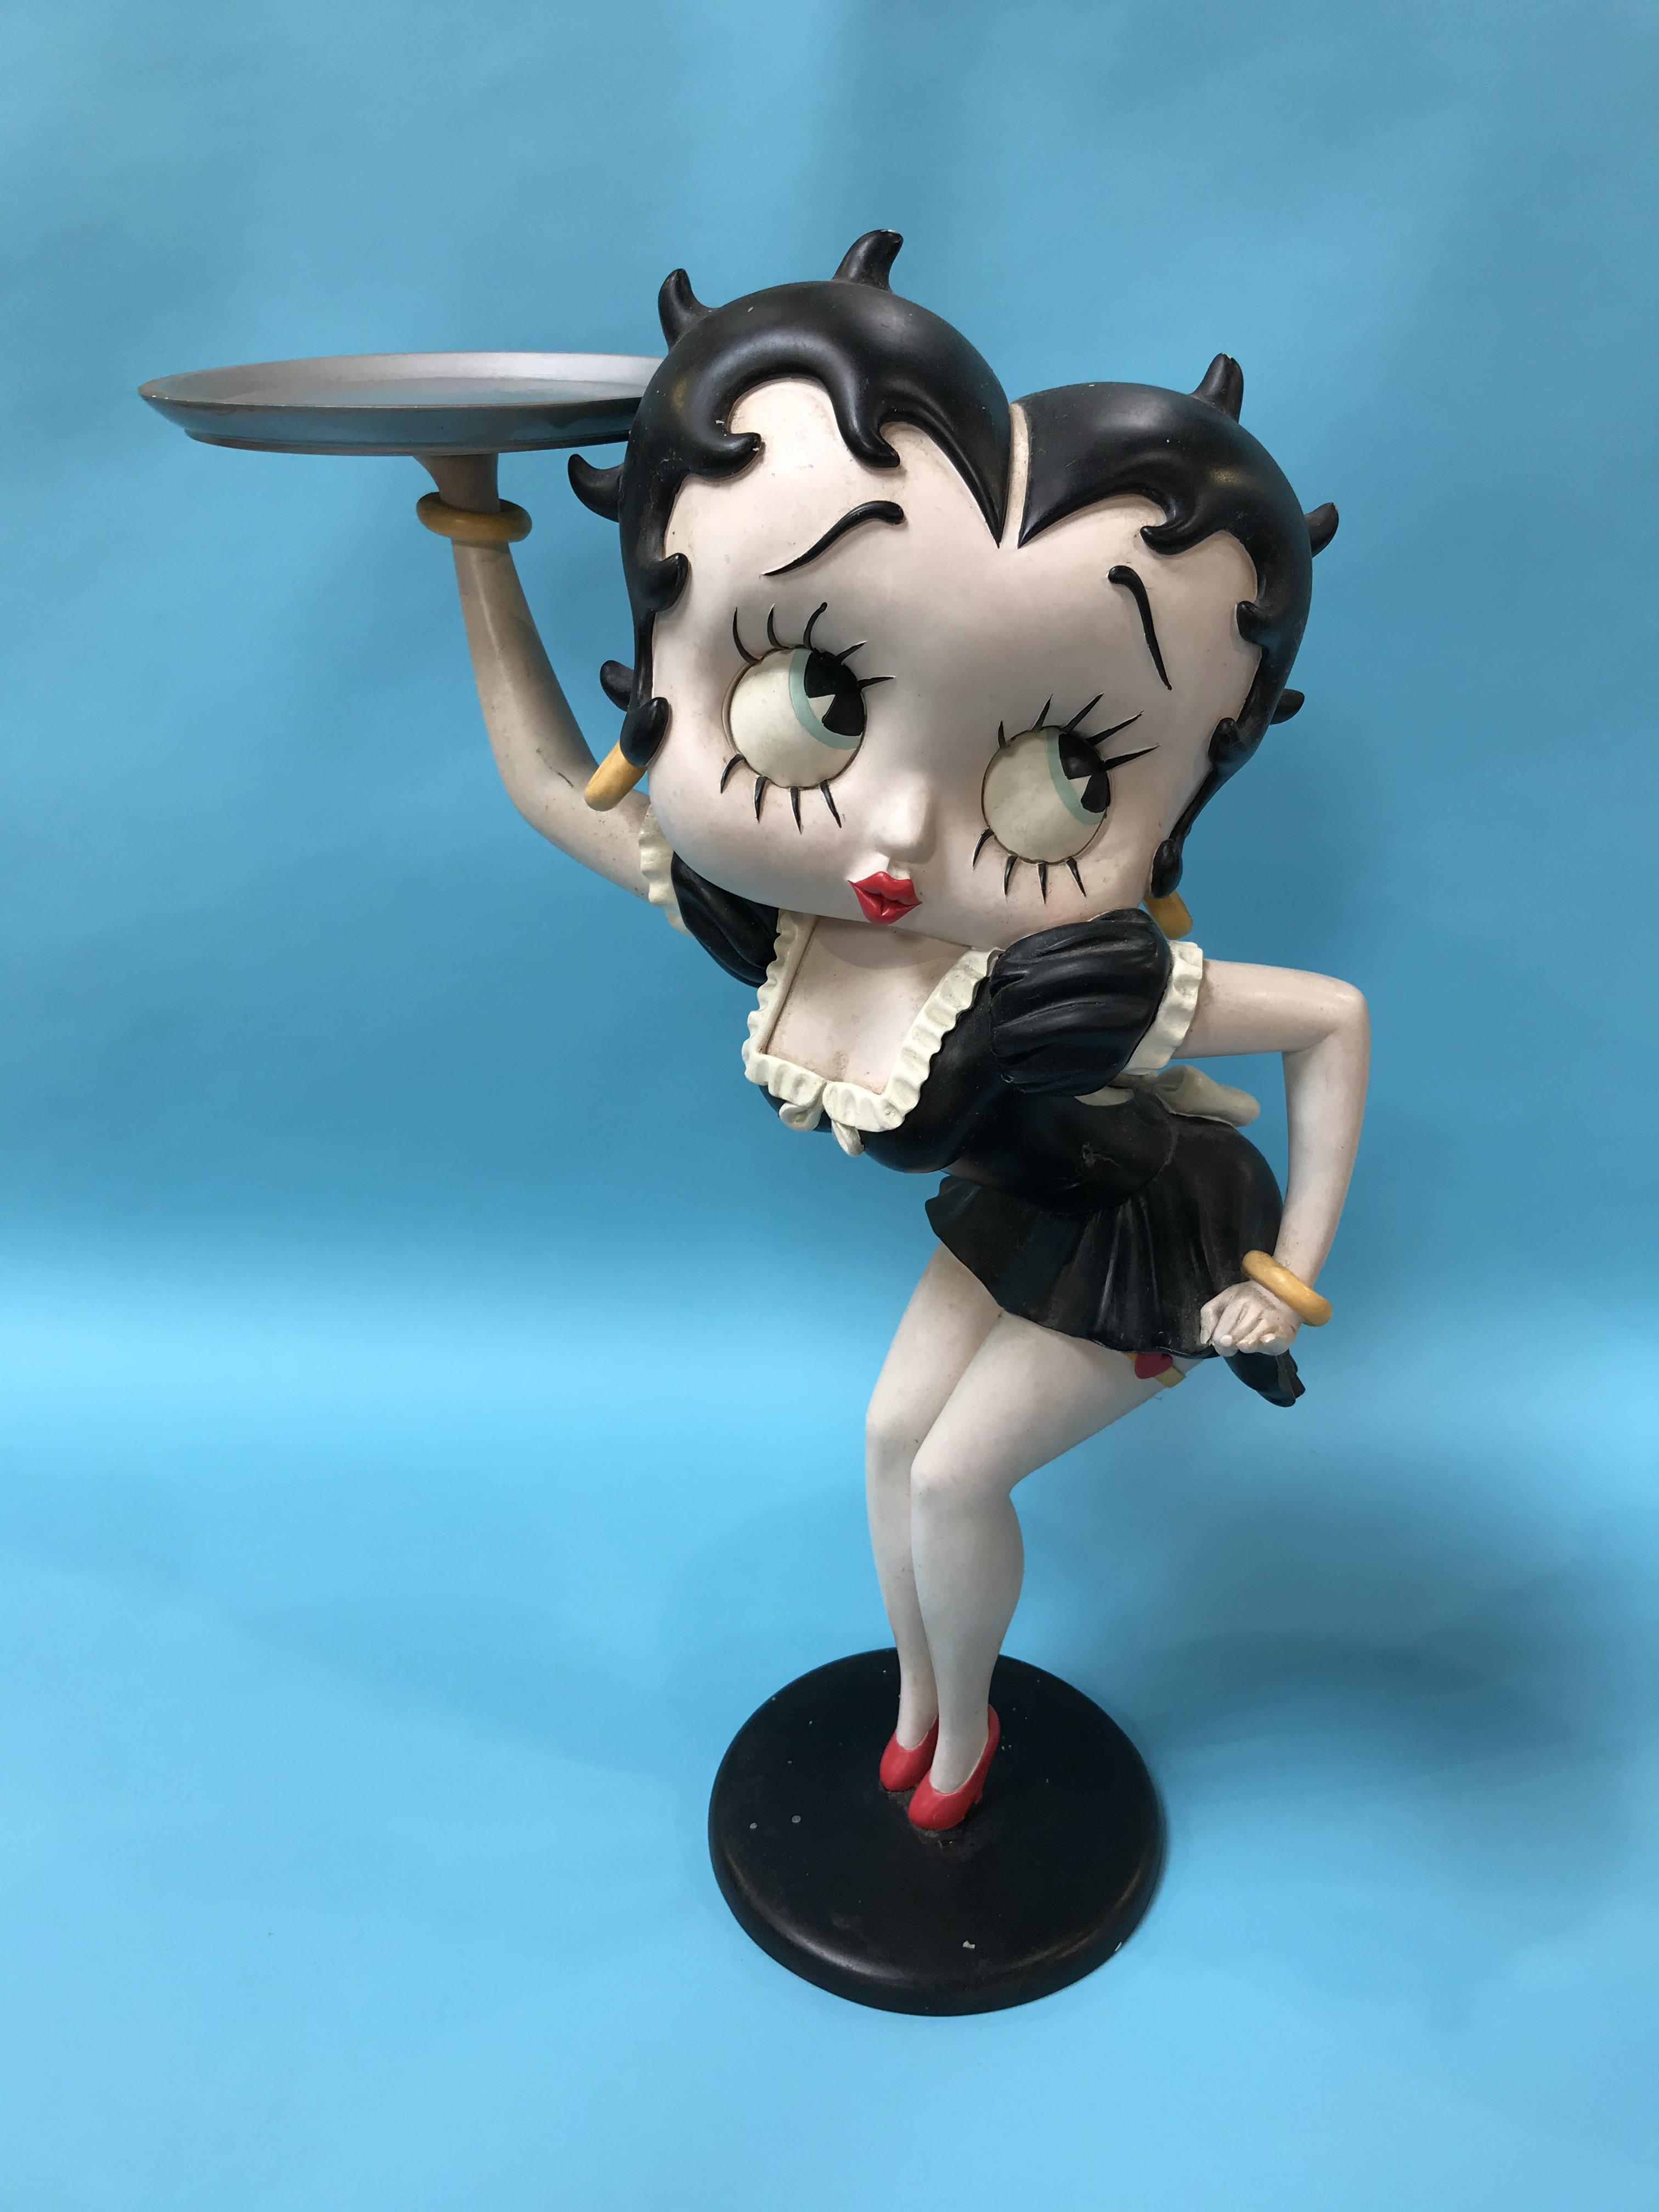 A large Betty Boop figure